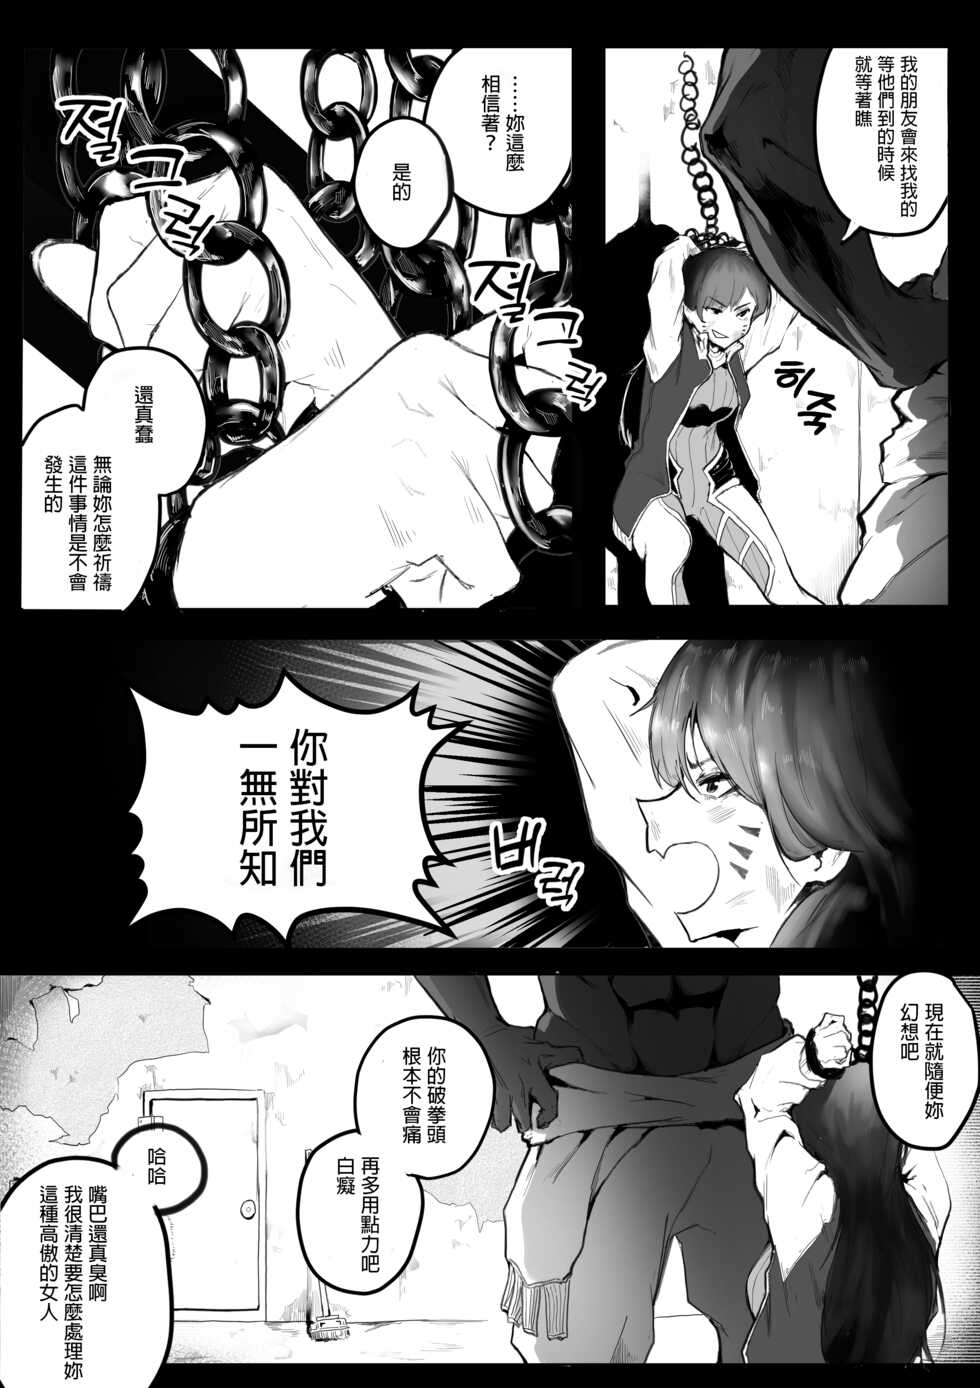 [Boole] HELLP ME PLS [Chinese] [GaLaSky個人漢化] - Page 7